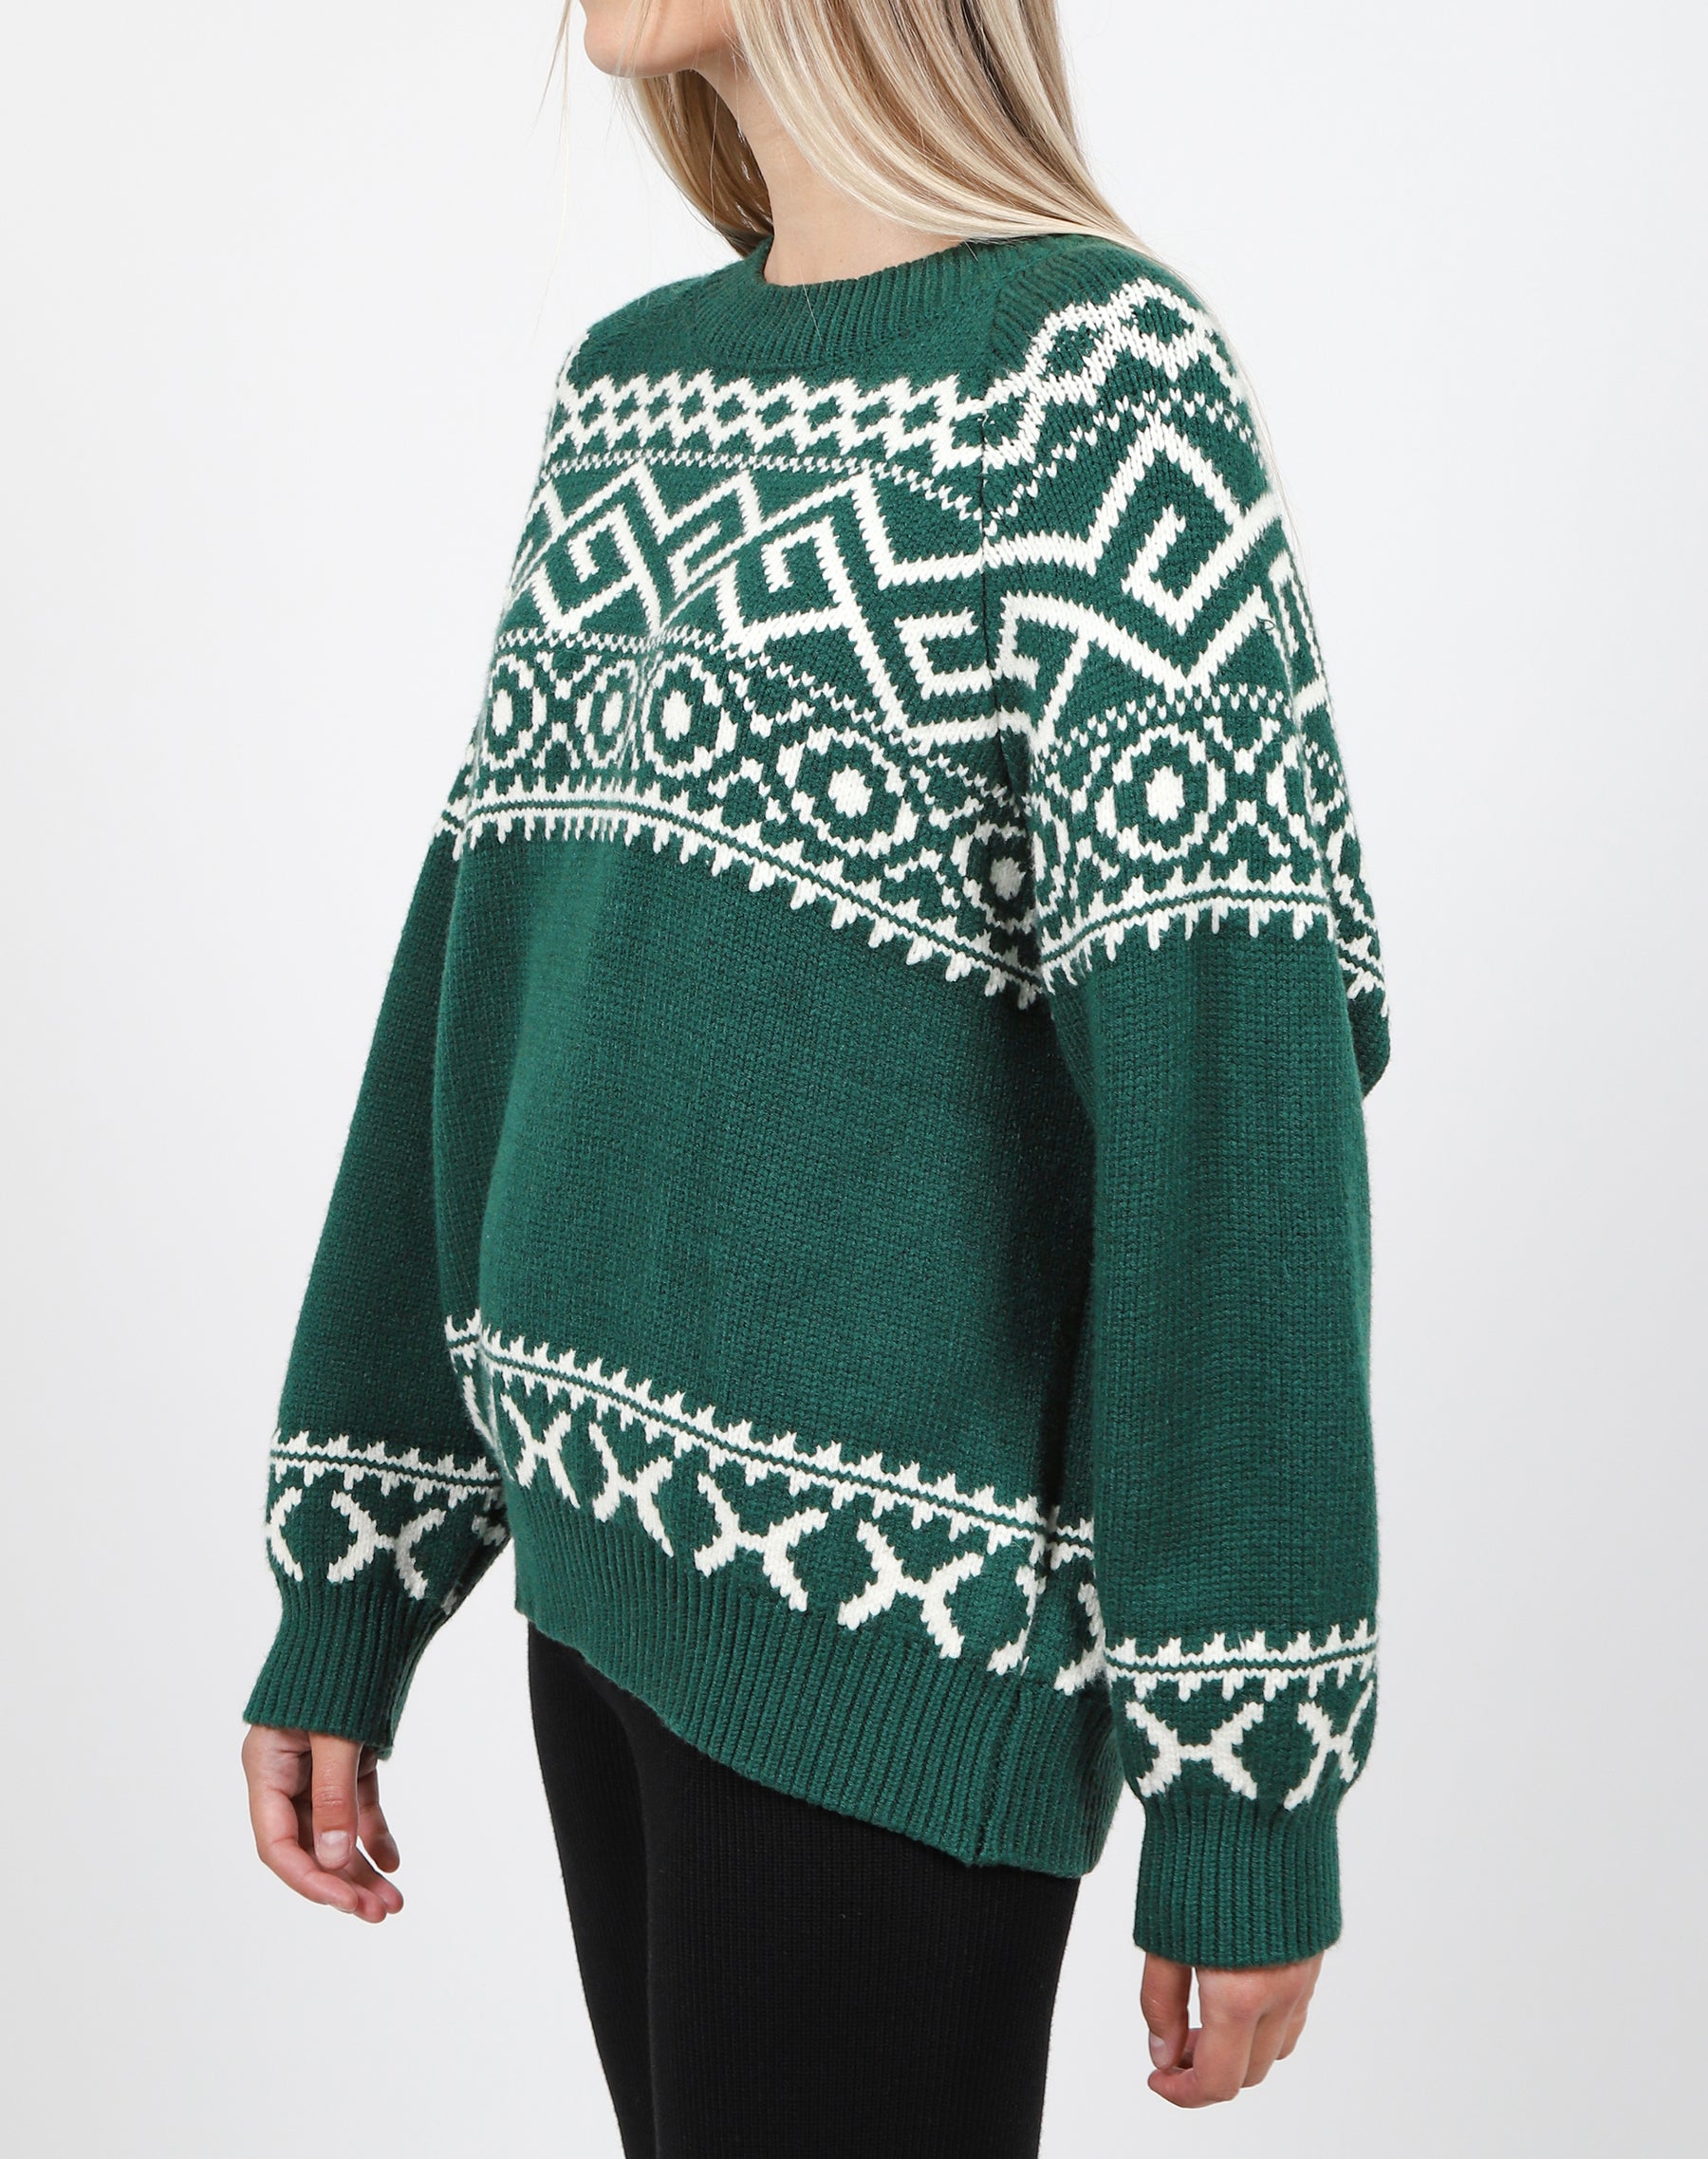 The Fair Isle Not Your Boyfriend's Knit | Emerald and Cream